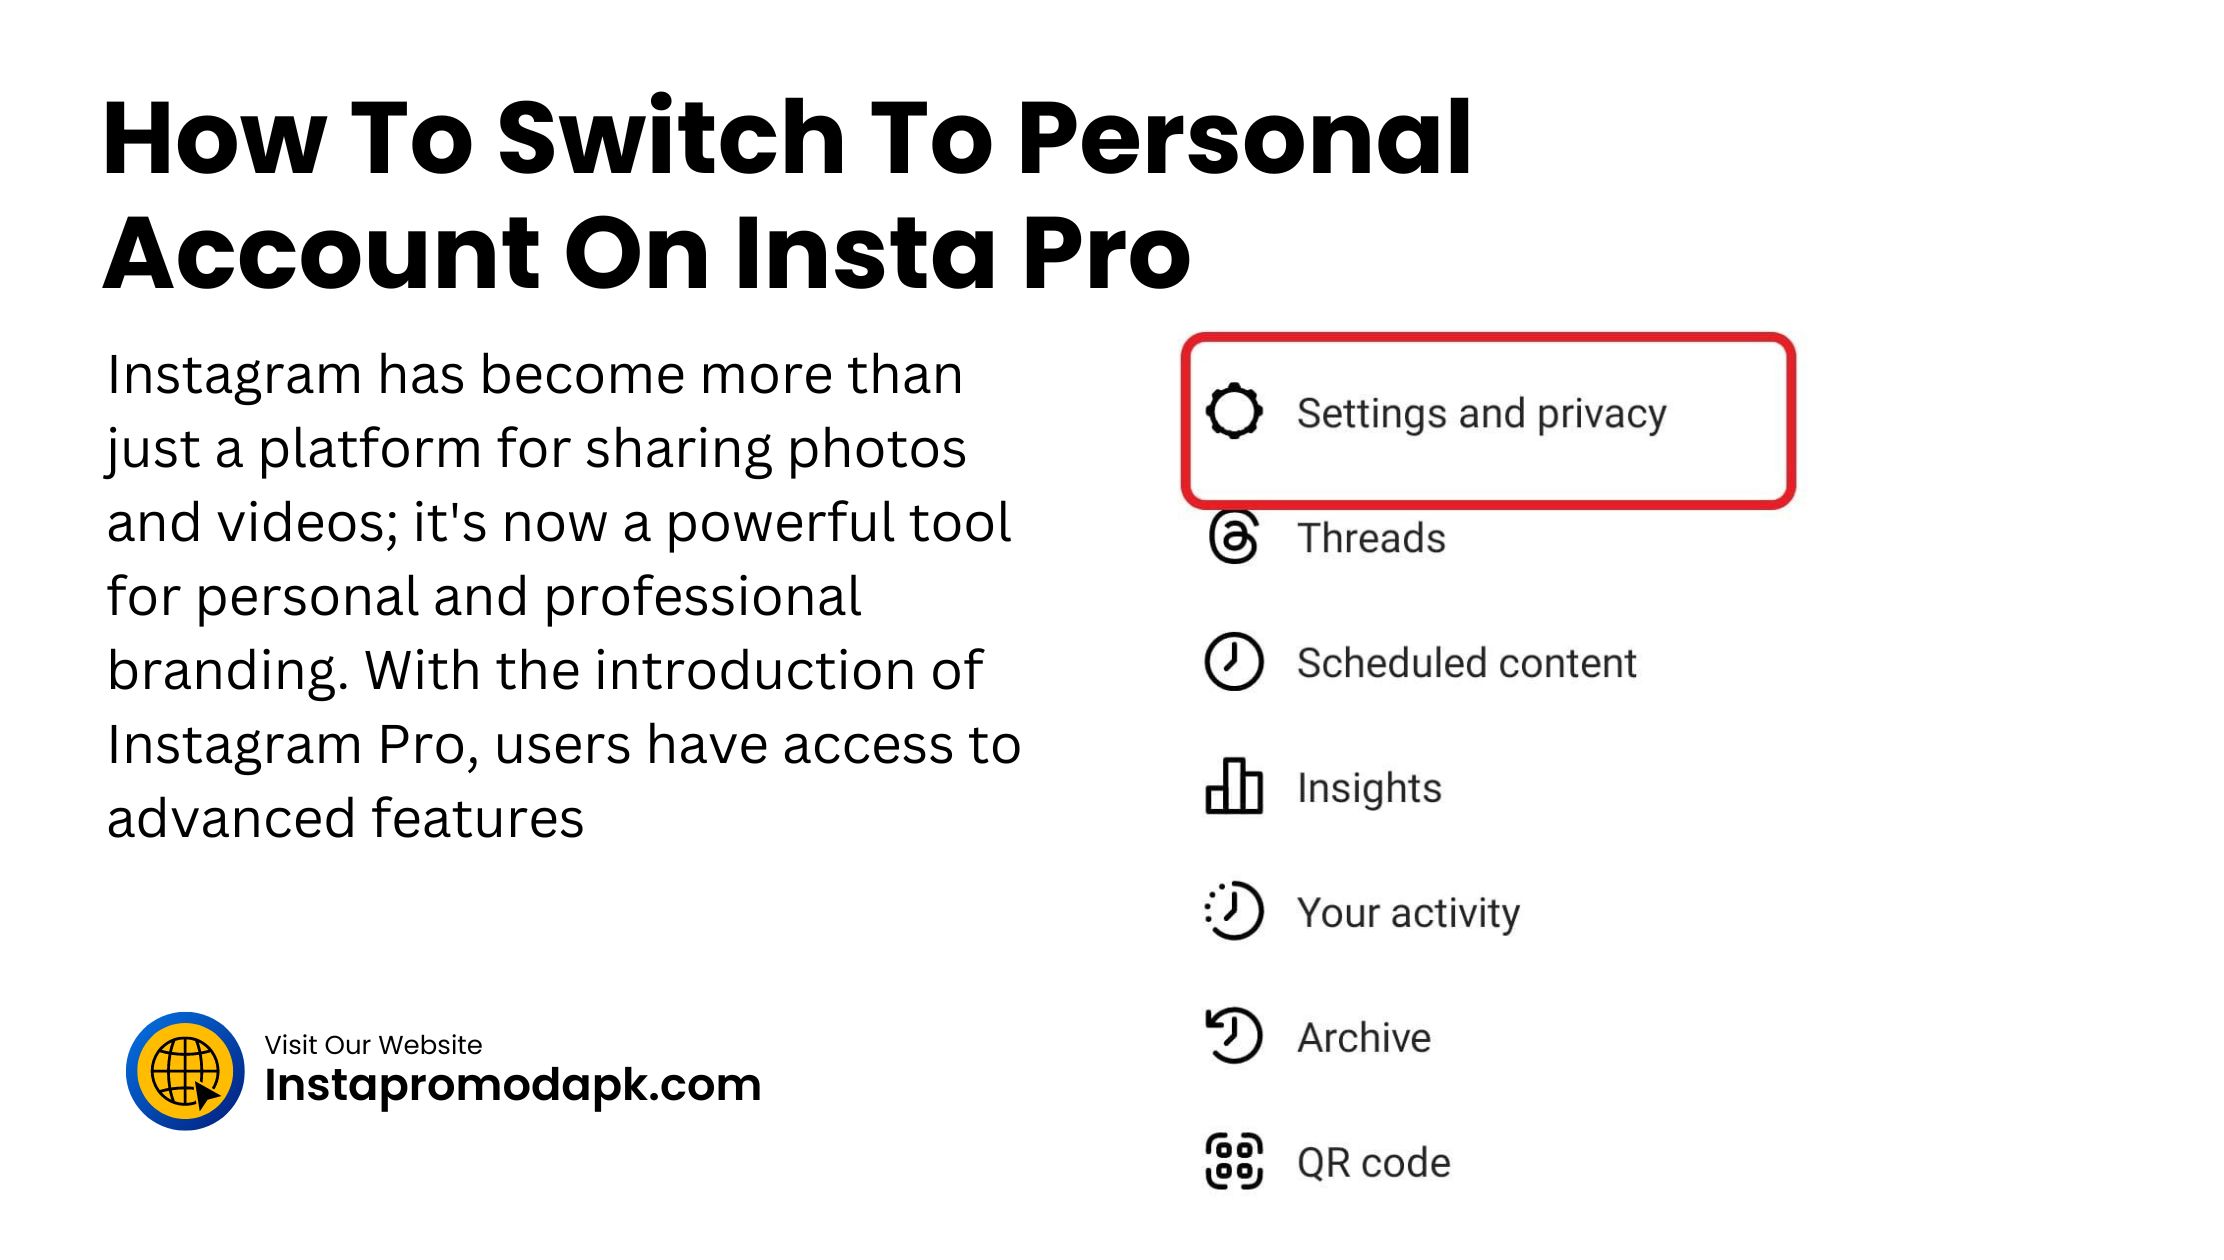 How To Switch To Personal Account On Insta Pro